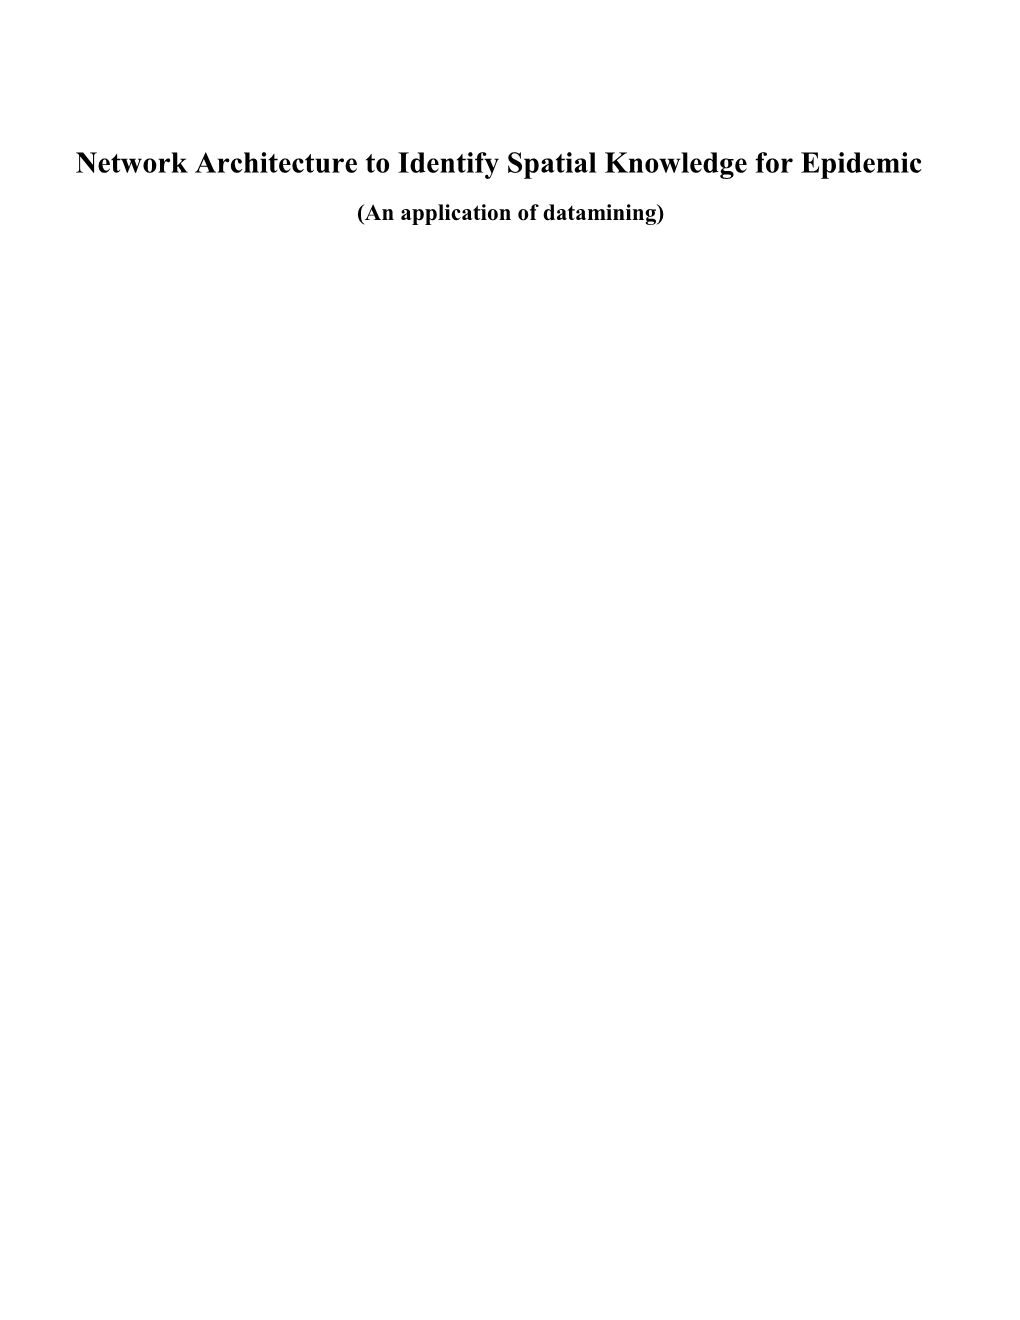 Network Architecture to Identify Spatial Knowledgefor Epidemic